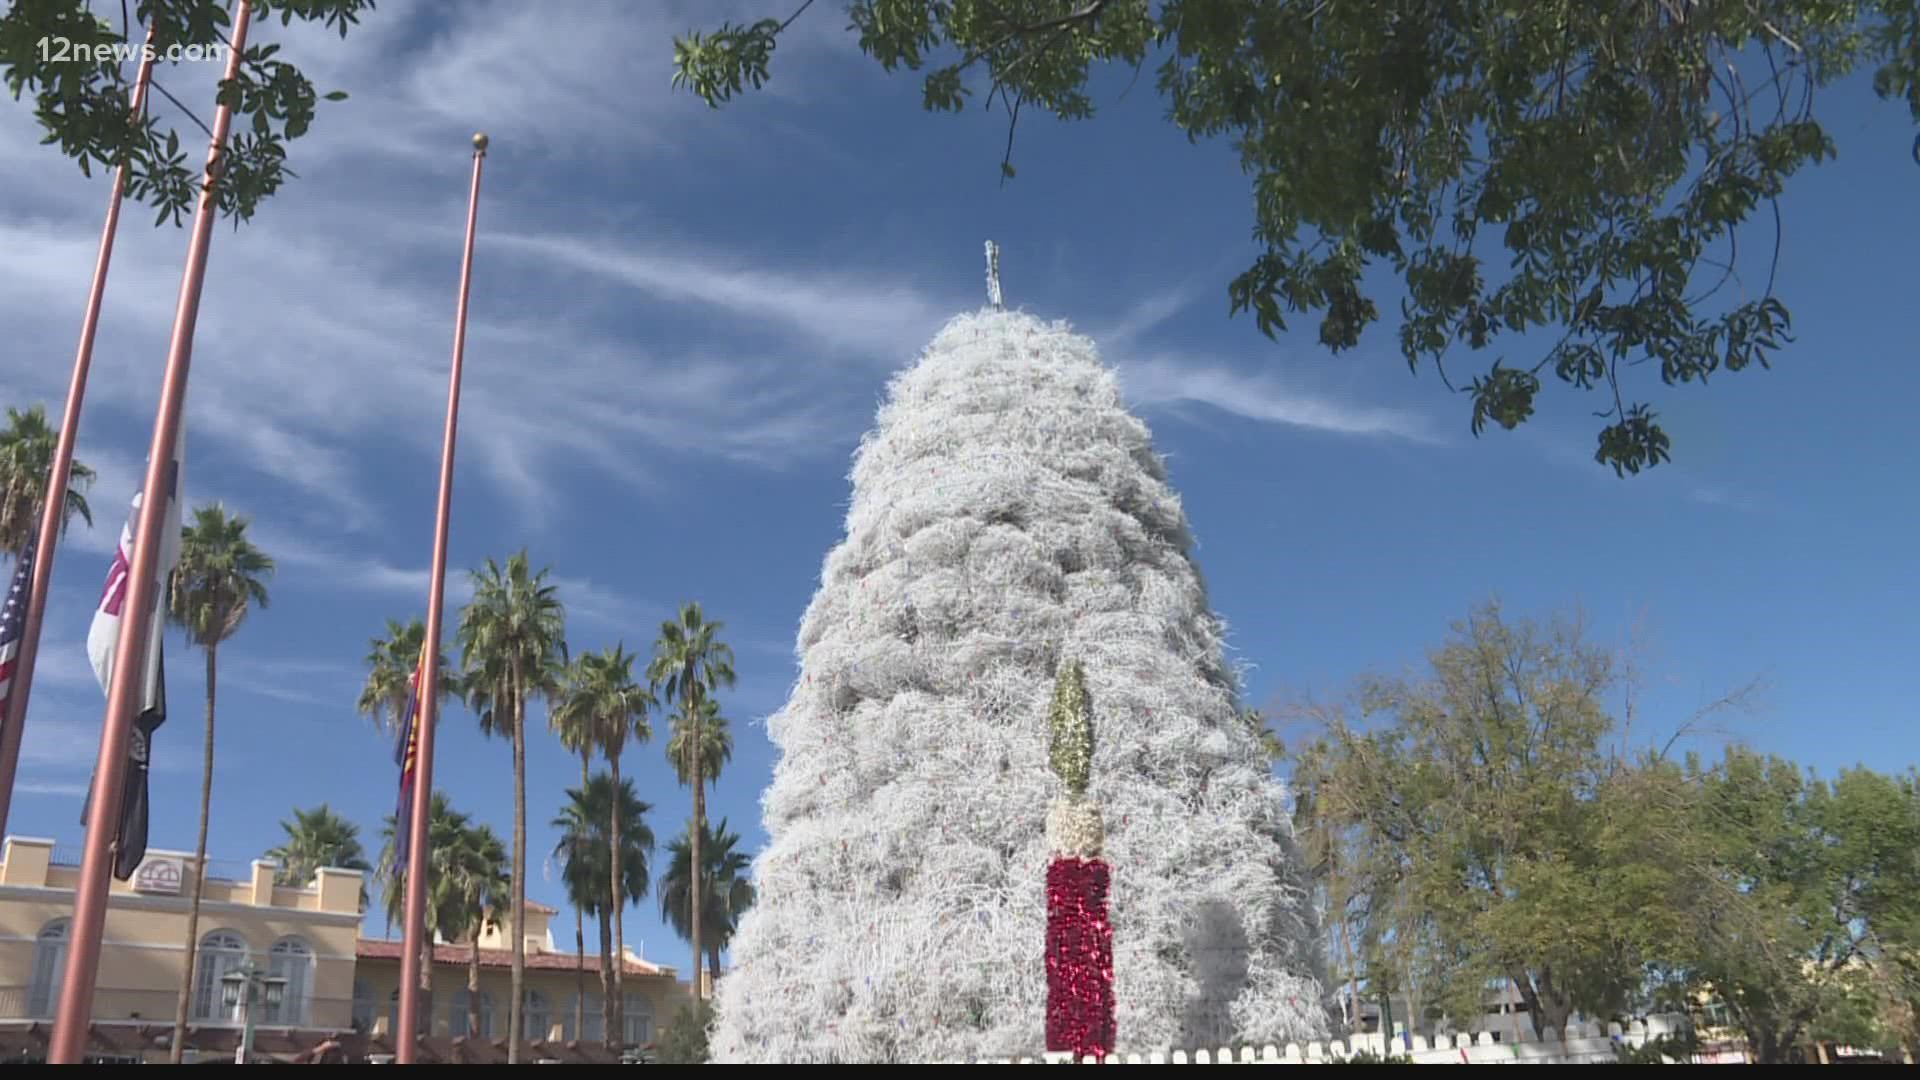 While taking a stroll in downtown Chandler, you can see crews putting the finishing touches on a 35-foot-tall Christmas tree unlike any other!